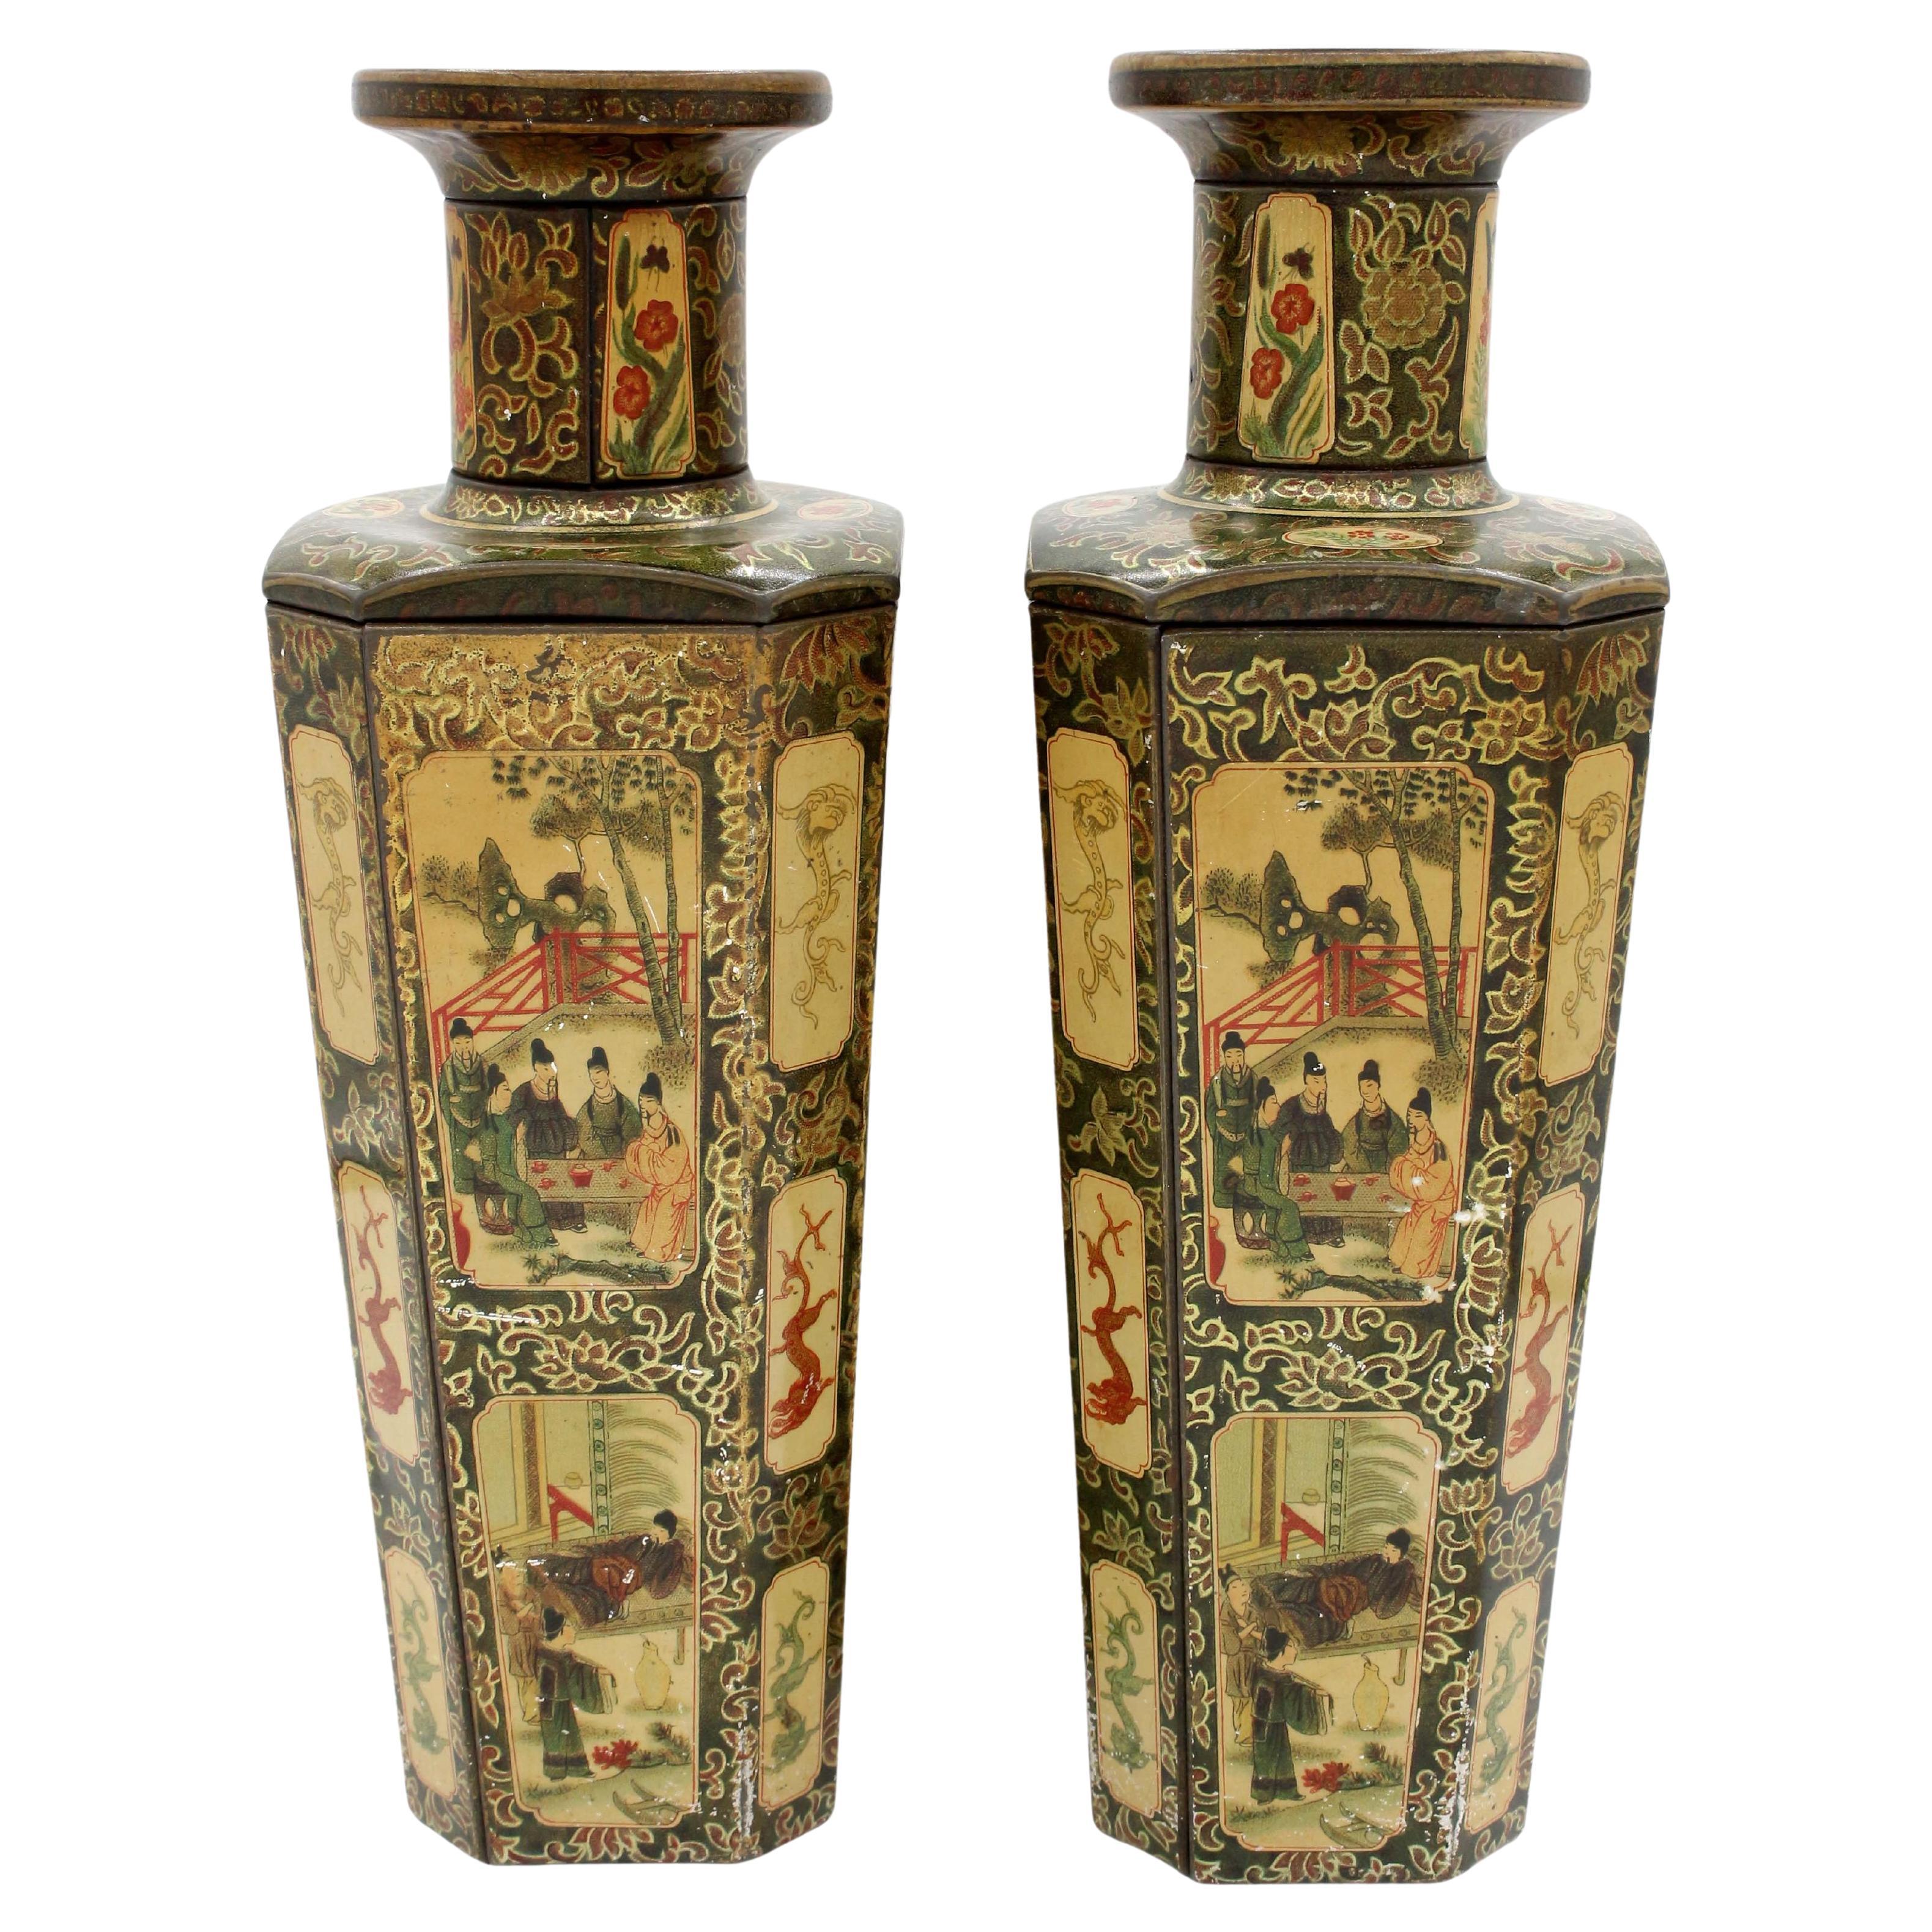 Pair of Vase Form Biscuit Tin Boxes by Huntley & Palmers, 1928, English